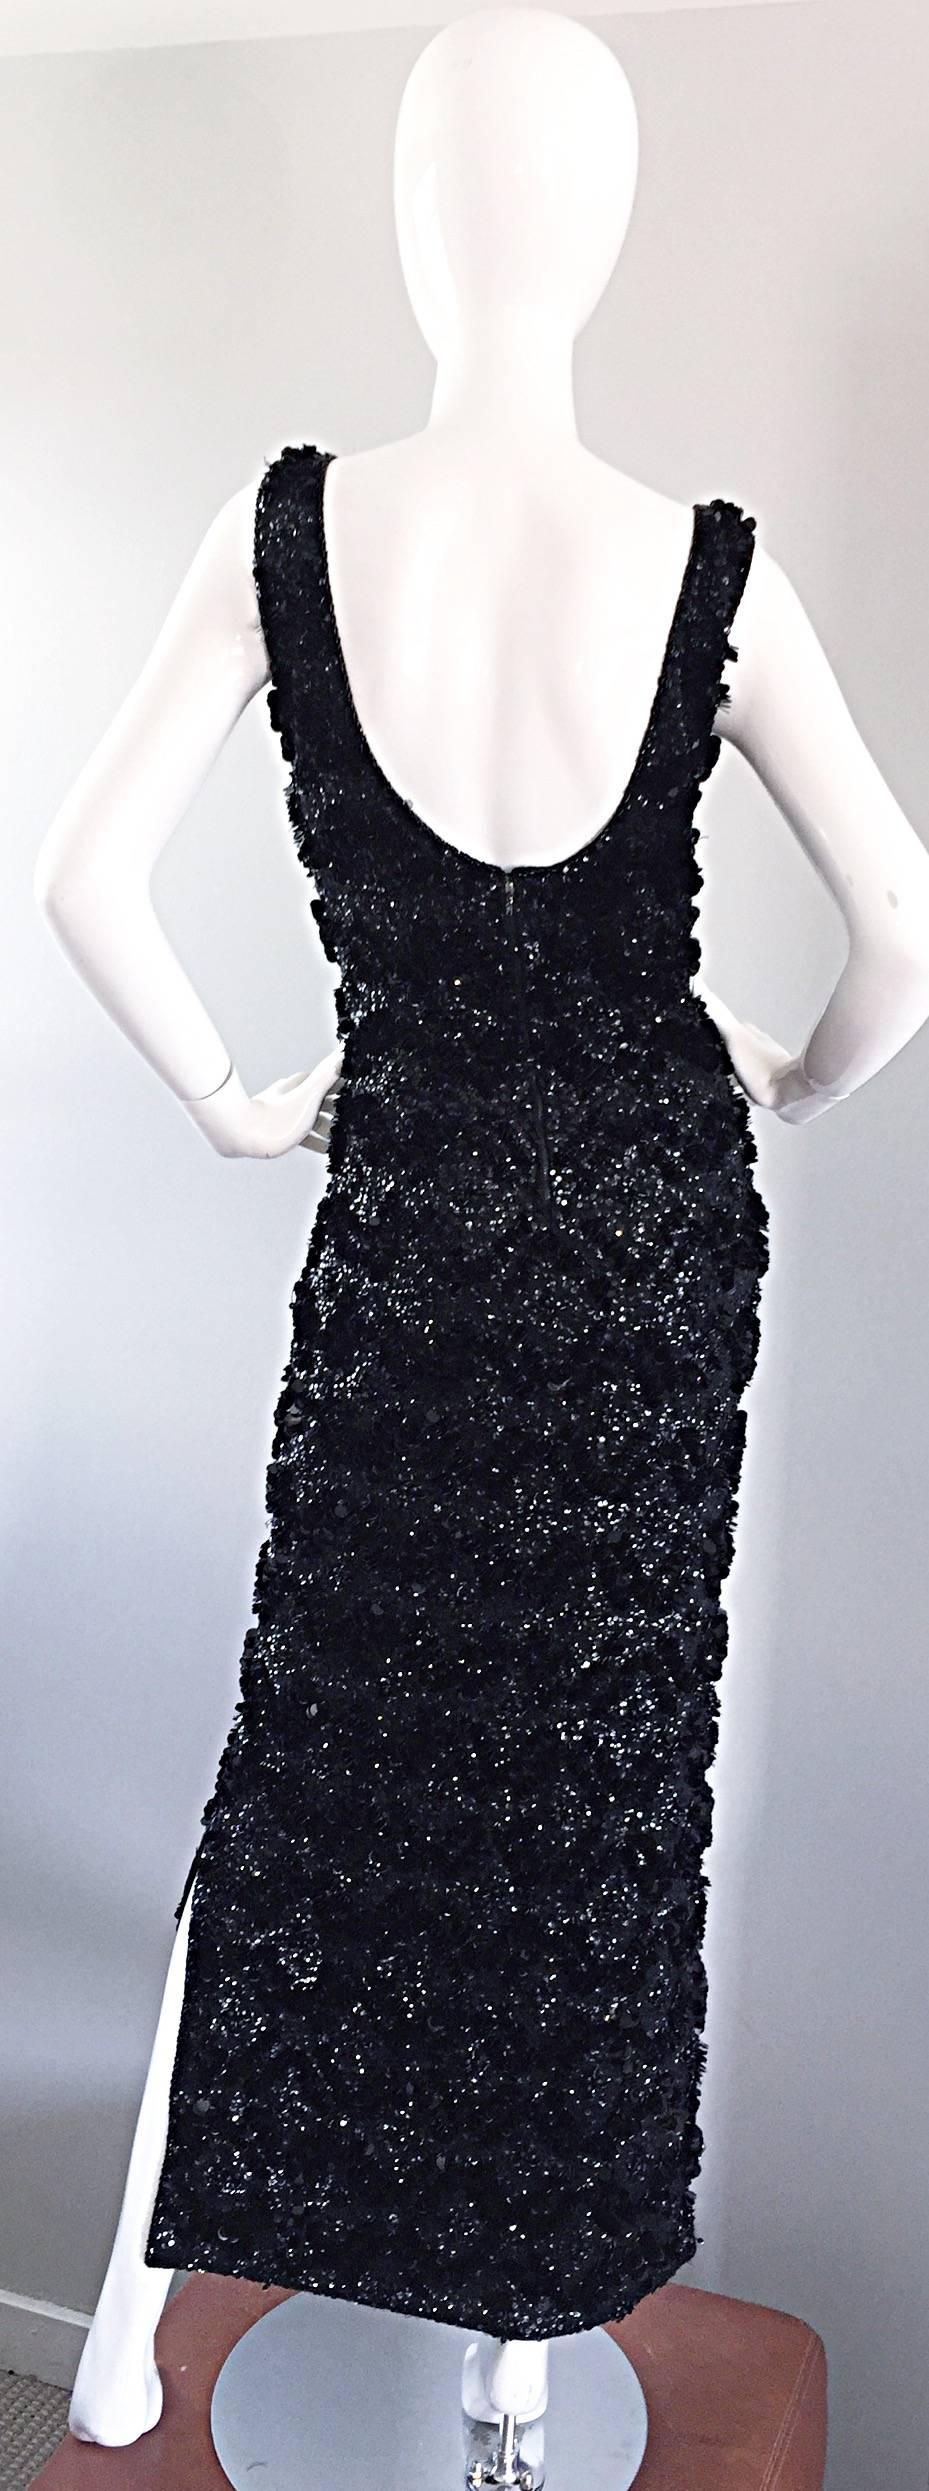 Incredible 1950s Vintage Black Sequin Beaded Wool 50s Wiggle Evening Dress Gown  In Excellent Condition For Sale In San Diego, CA